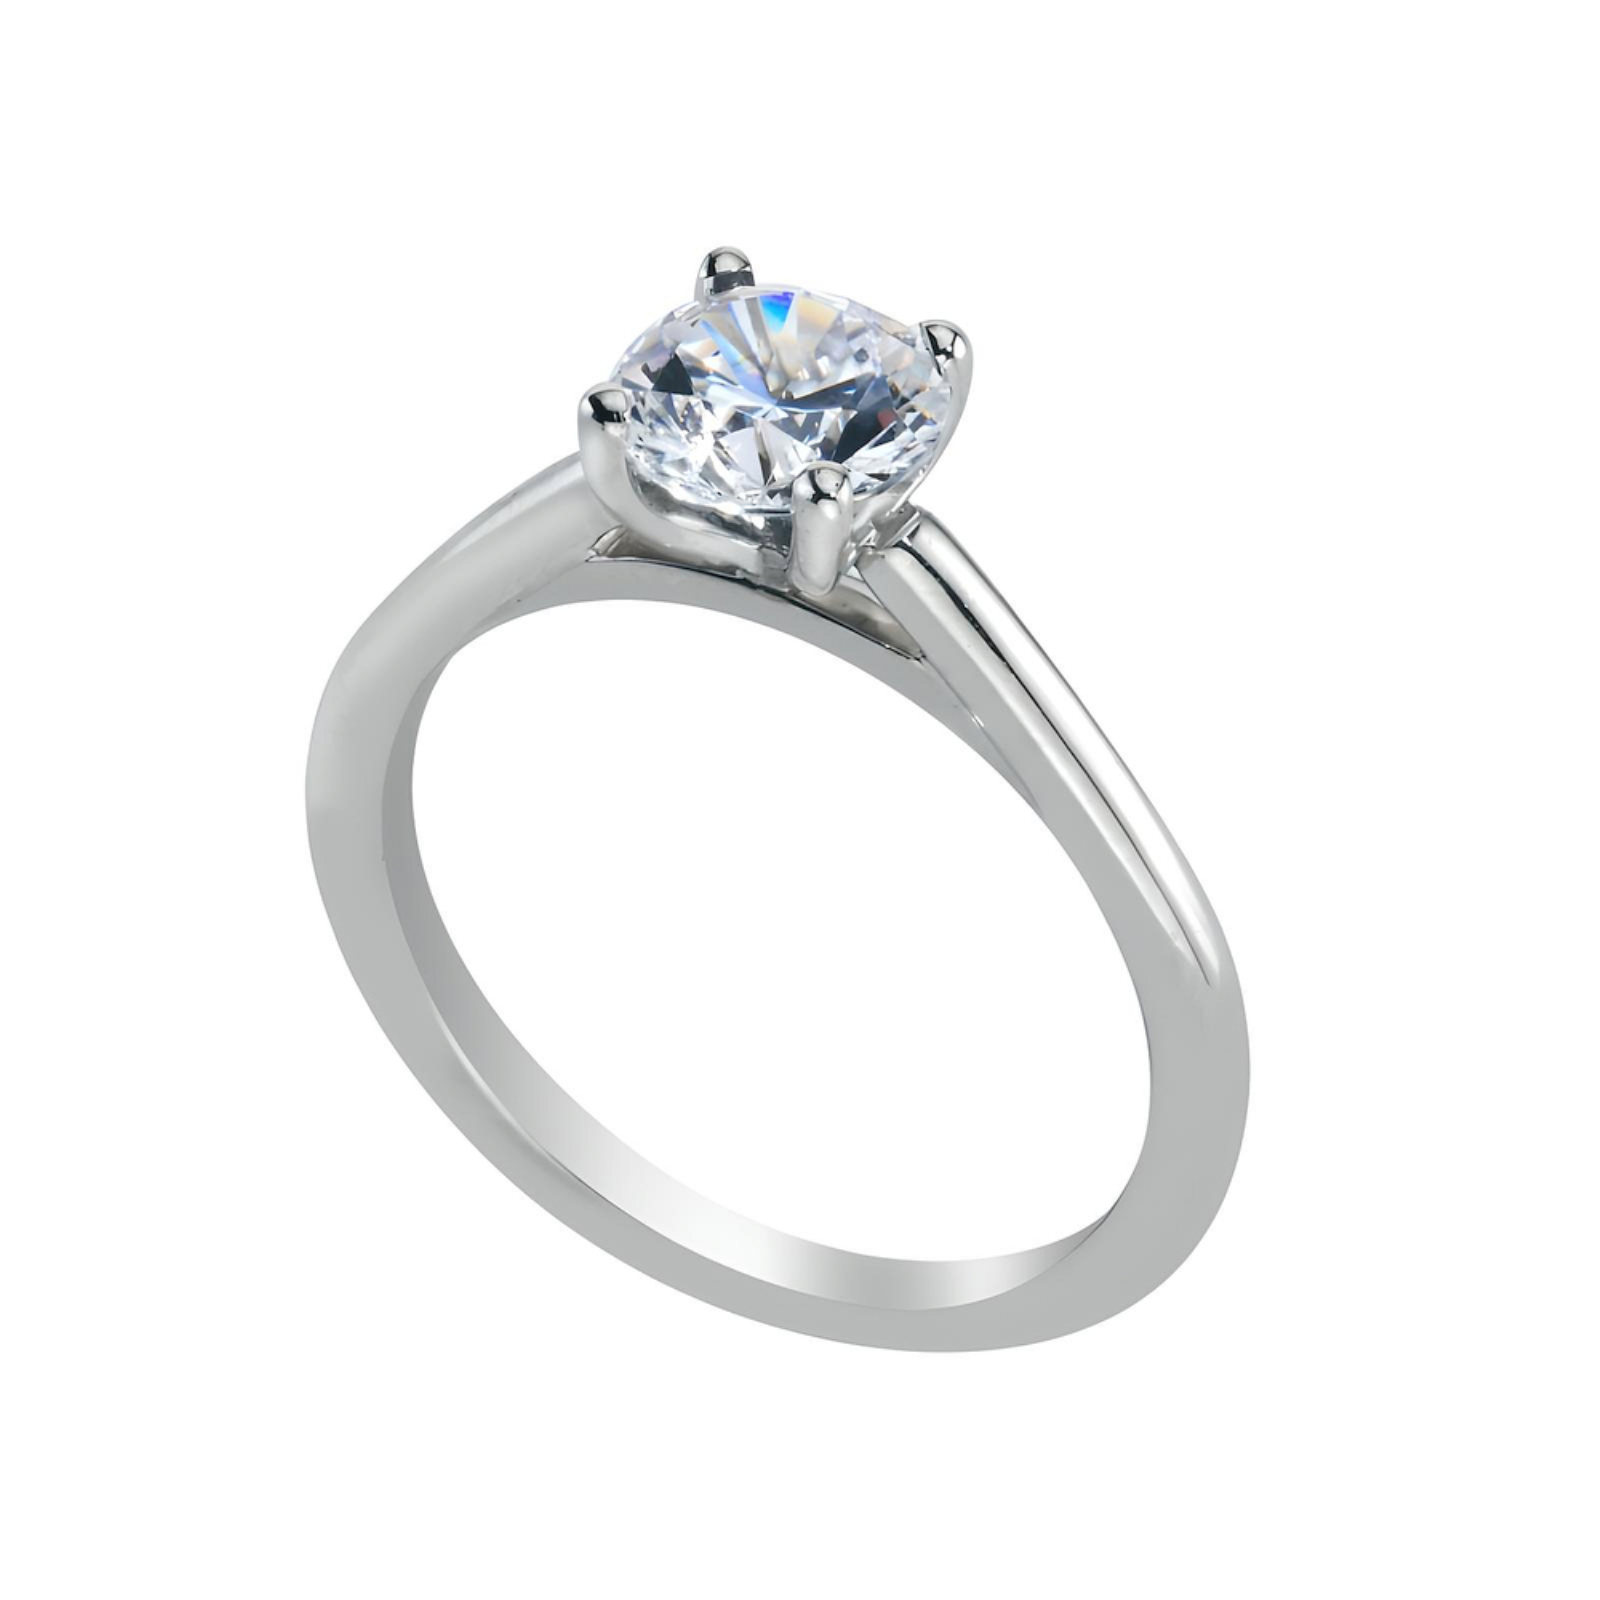 Platinum Solitaire Engagement Ring Mounting